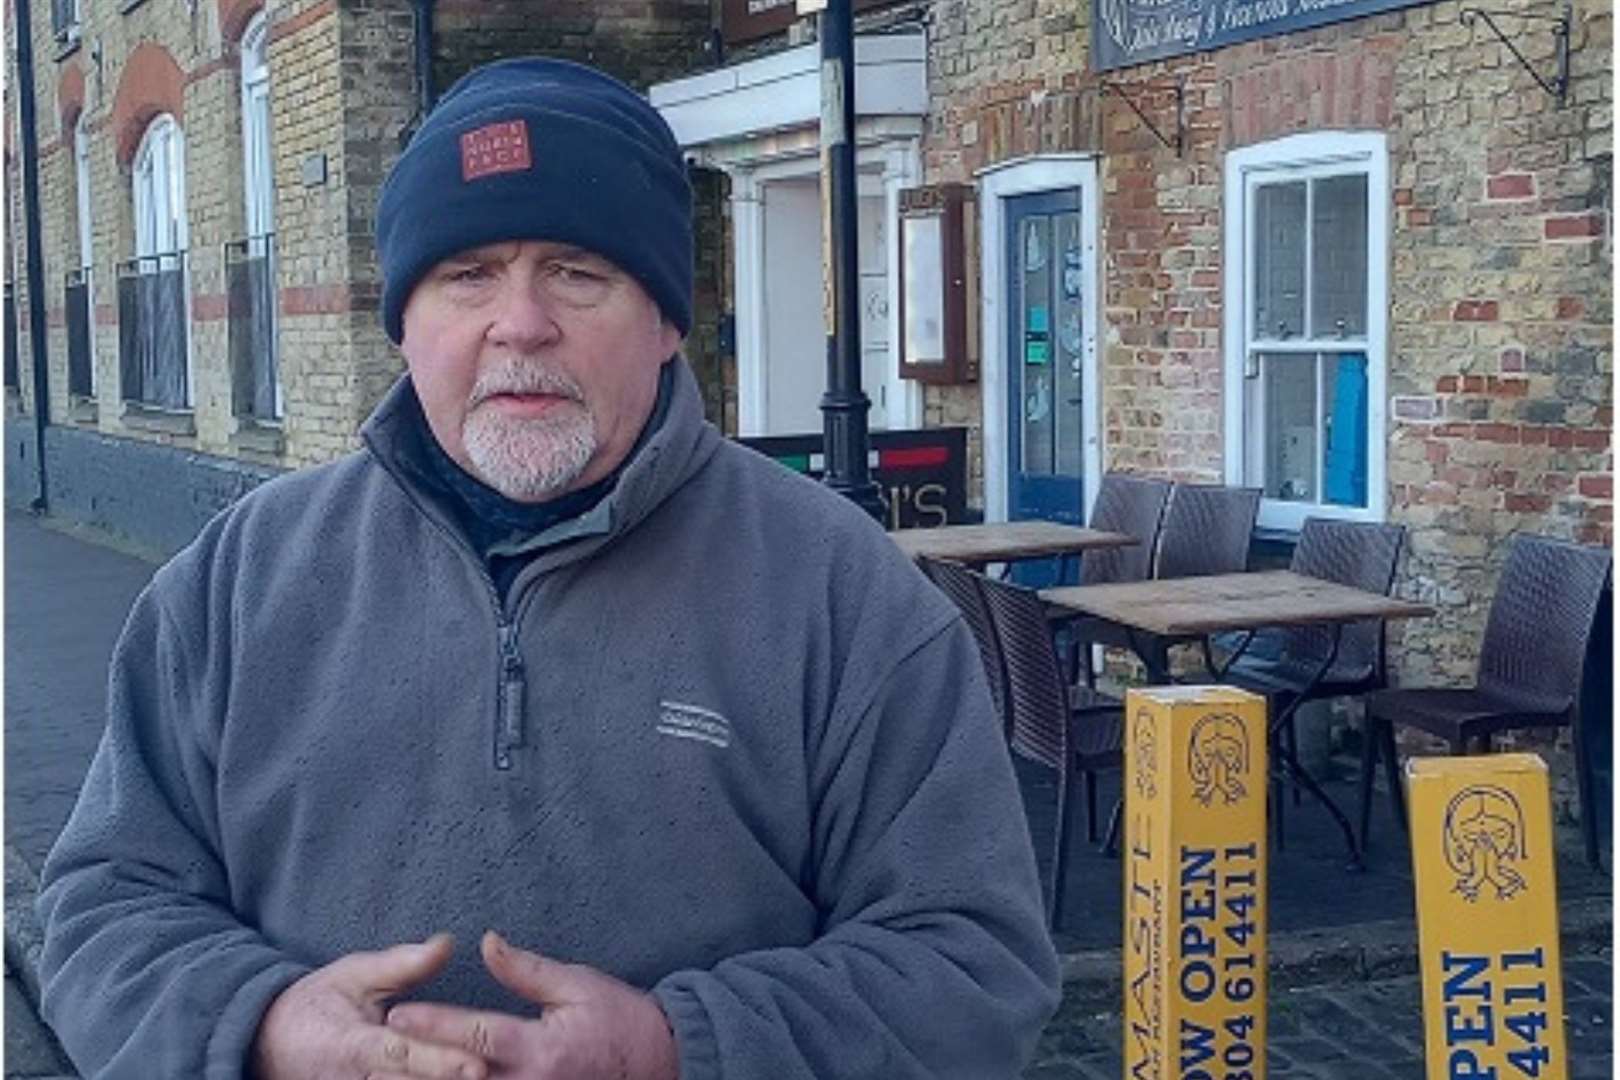 Chris Elliott says he was attacked on The Quay in Sandwich